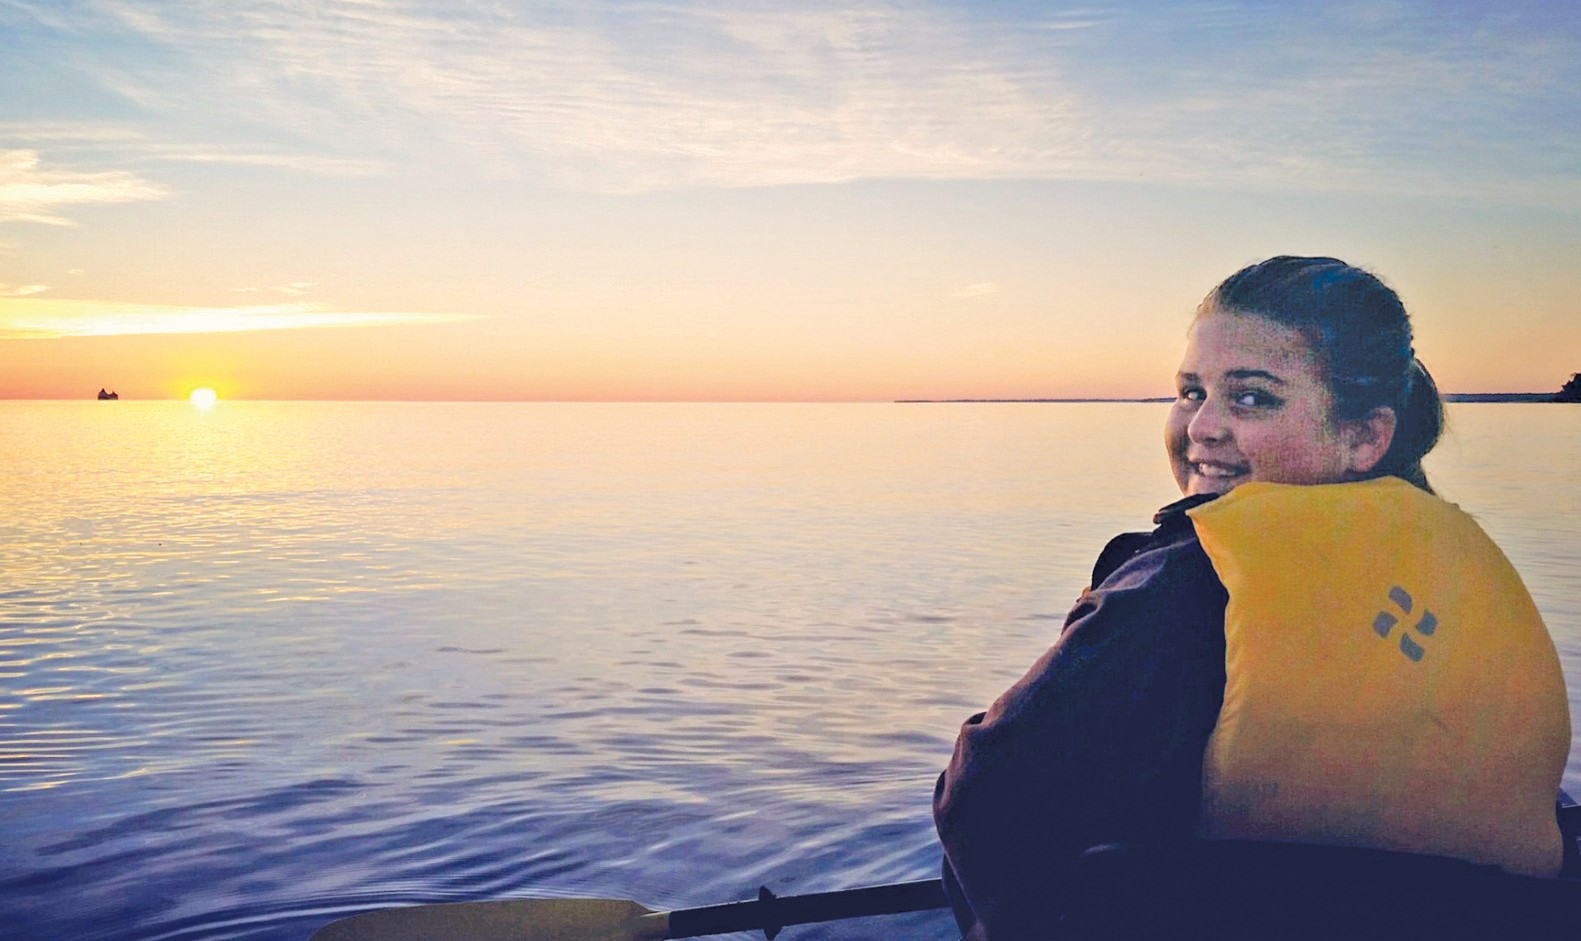 At right: At about 7 a.m., Izzy Nizschke looks back at her father, Kyle Nitzschke, during the kayak trip to Round Island Monday, August 29. In the distance, to the left, a freighter is seen on the horizon shortly after sunrise. (Photograph courtesy Holly Nitzschke)